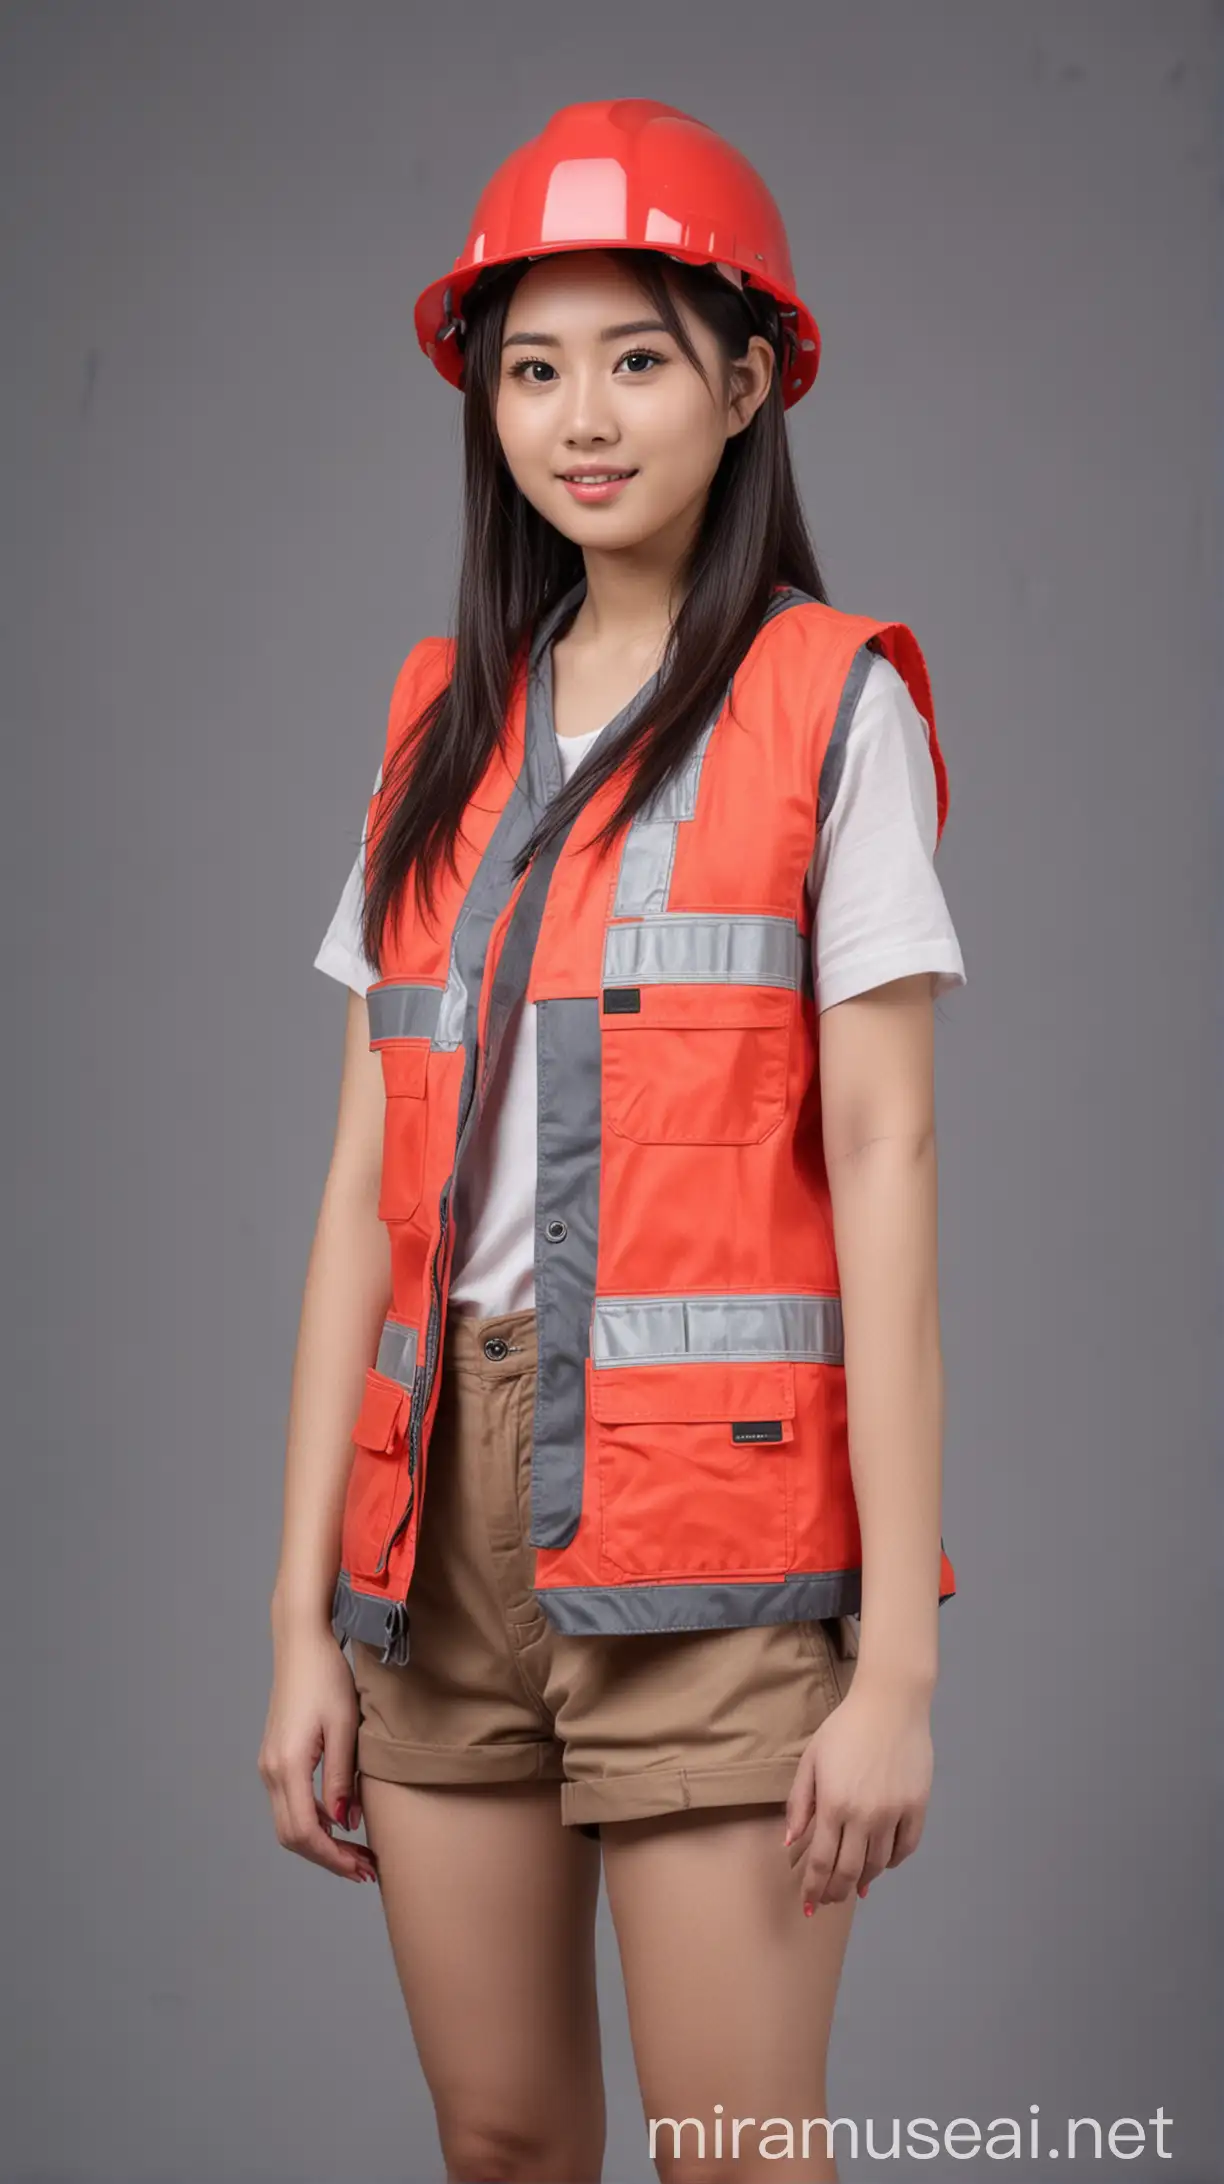 Beautiful Asian Girl Wearing Red Construction Vest Confident Young Woman in Vibrant Work Attire